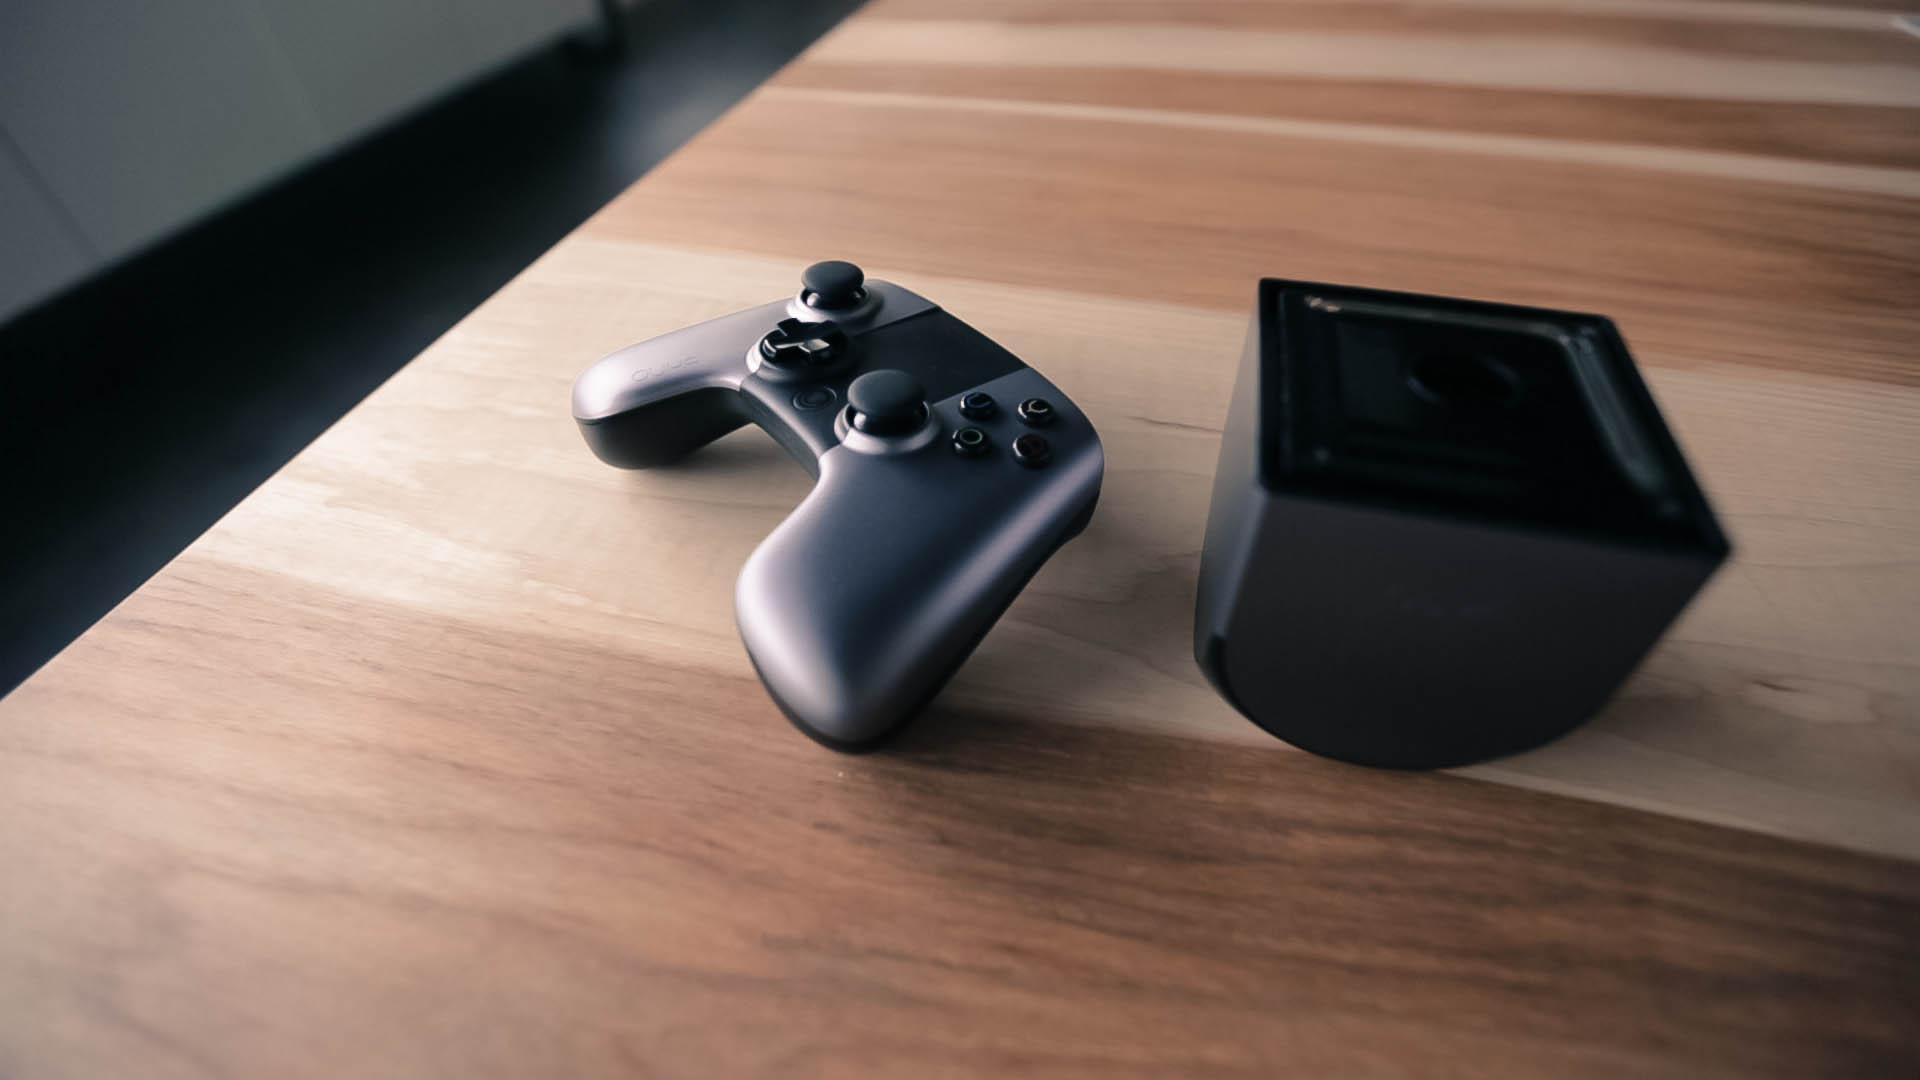 S&S; News: Ouya game sales “better than expected”, “reasonably profitable”